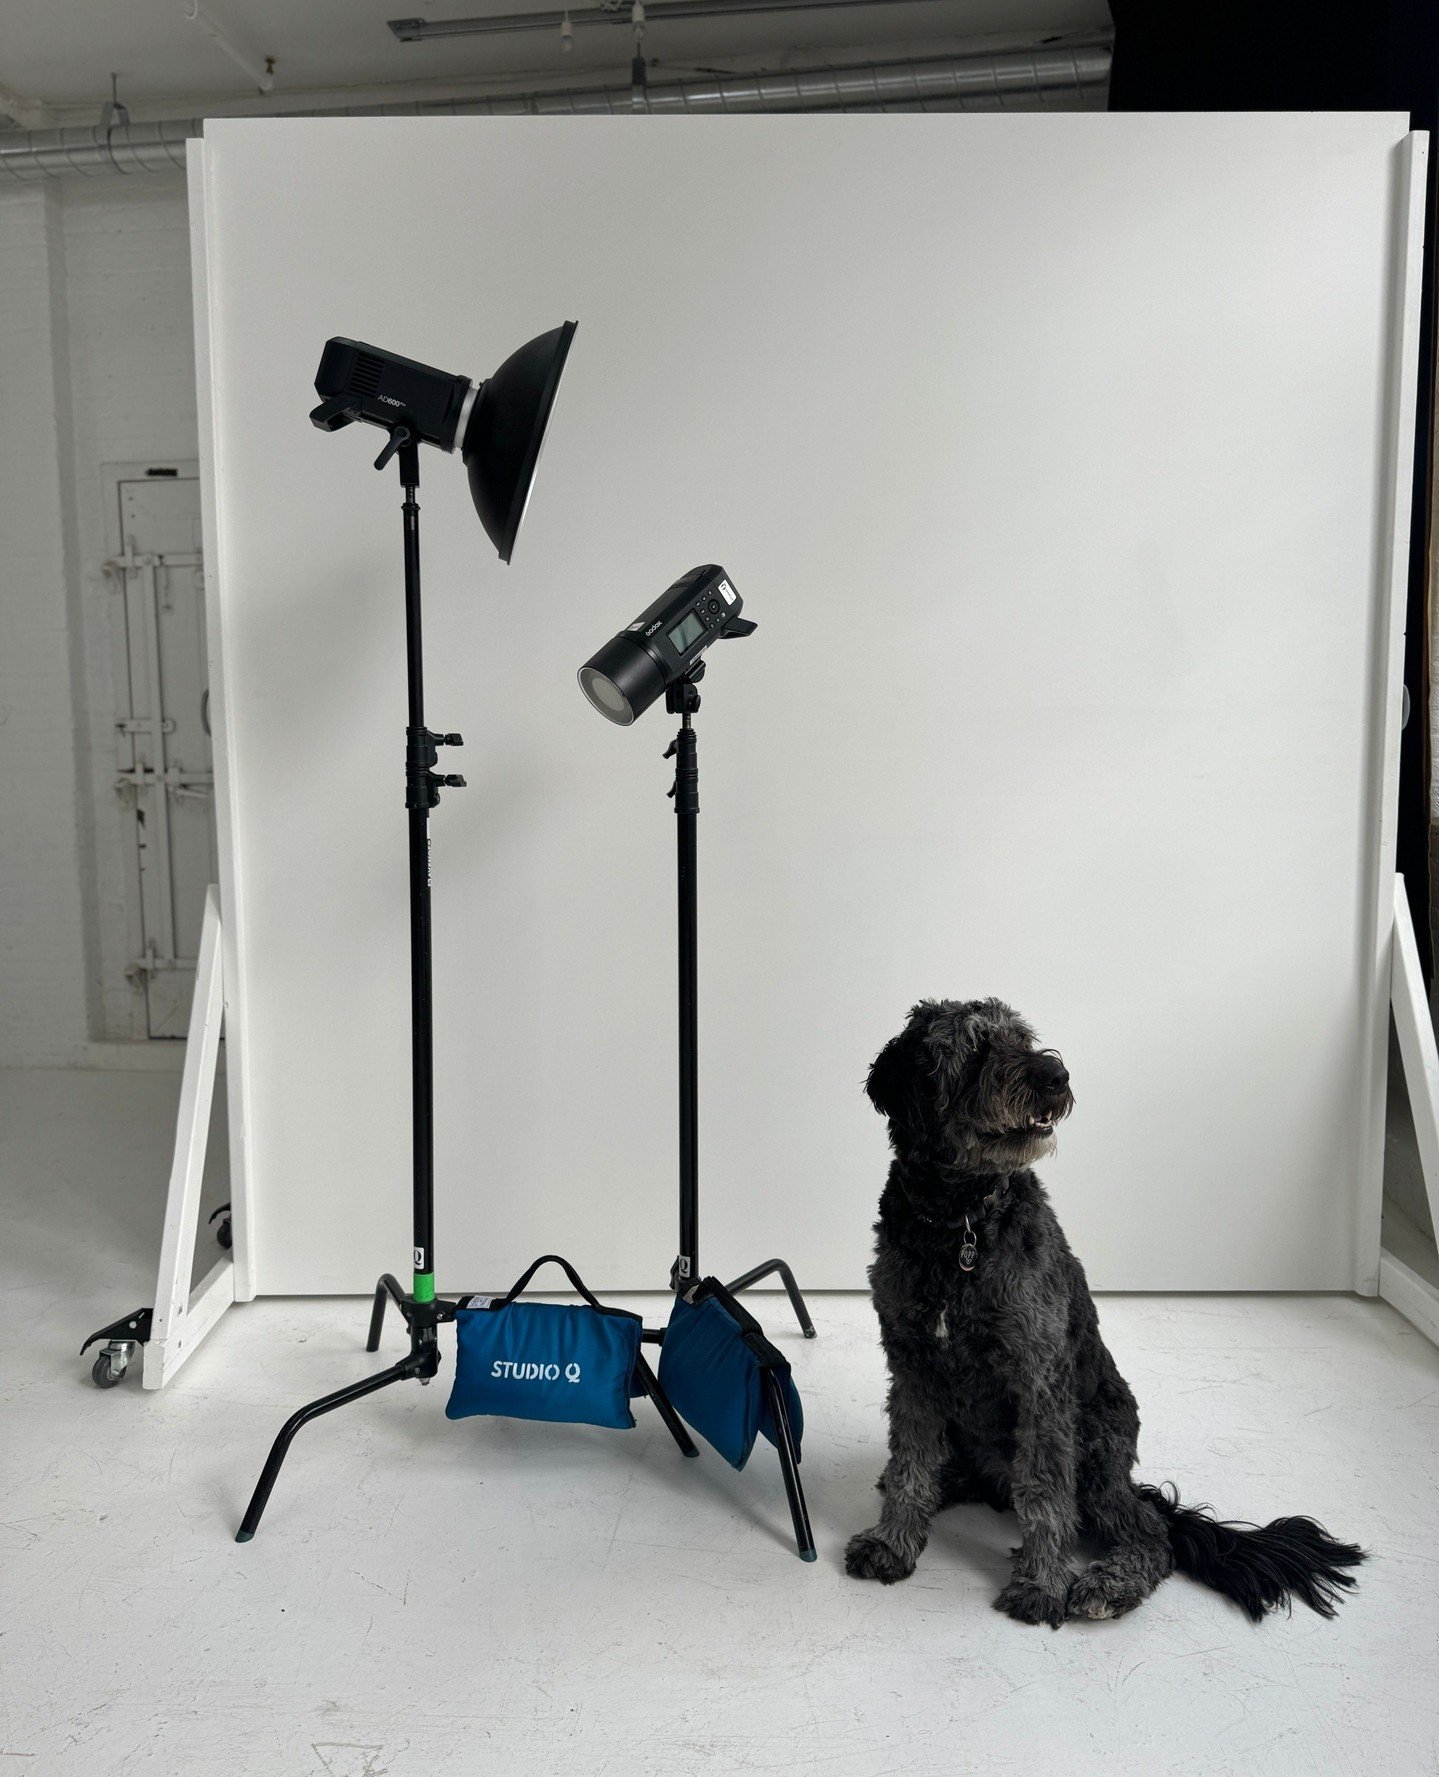 Studio? Check. Photographer? Check. Products and props? Check. Lighting? Uh-oh&hellip;⁠
⁠
Don't panic! We have everything you need to light your set and nail your shoot. Lighting packages are available for add-on to any studio rental &ndash; just pic